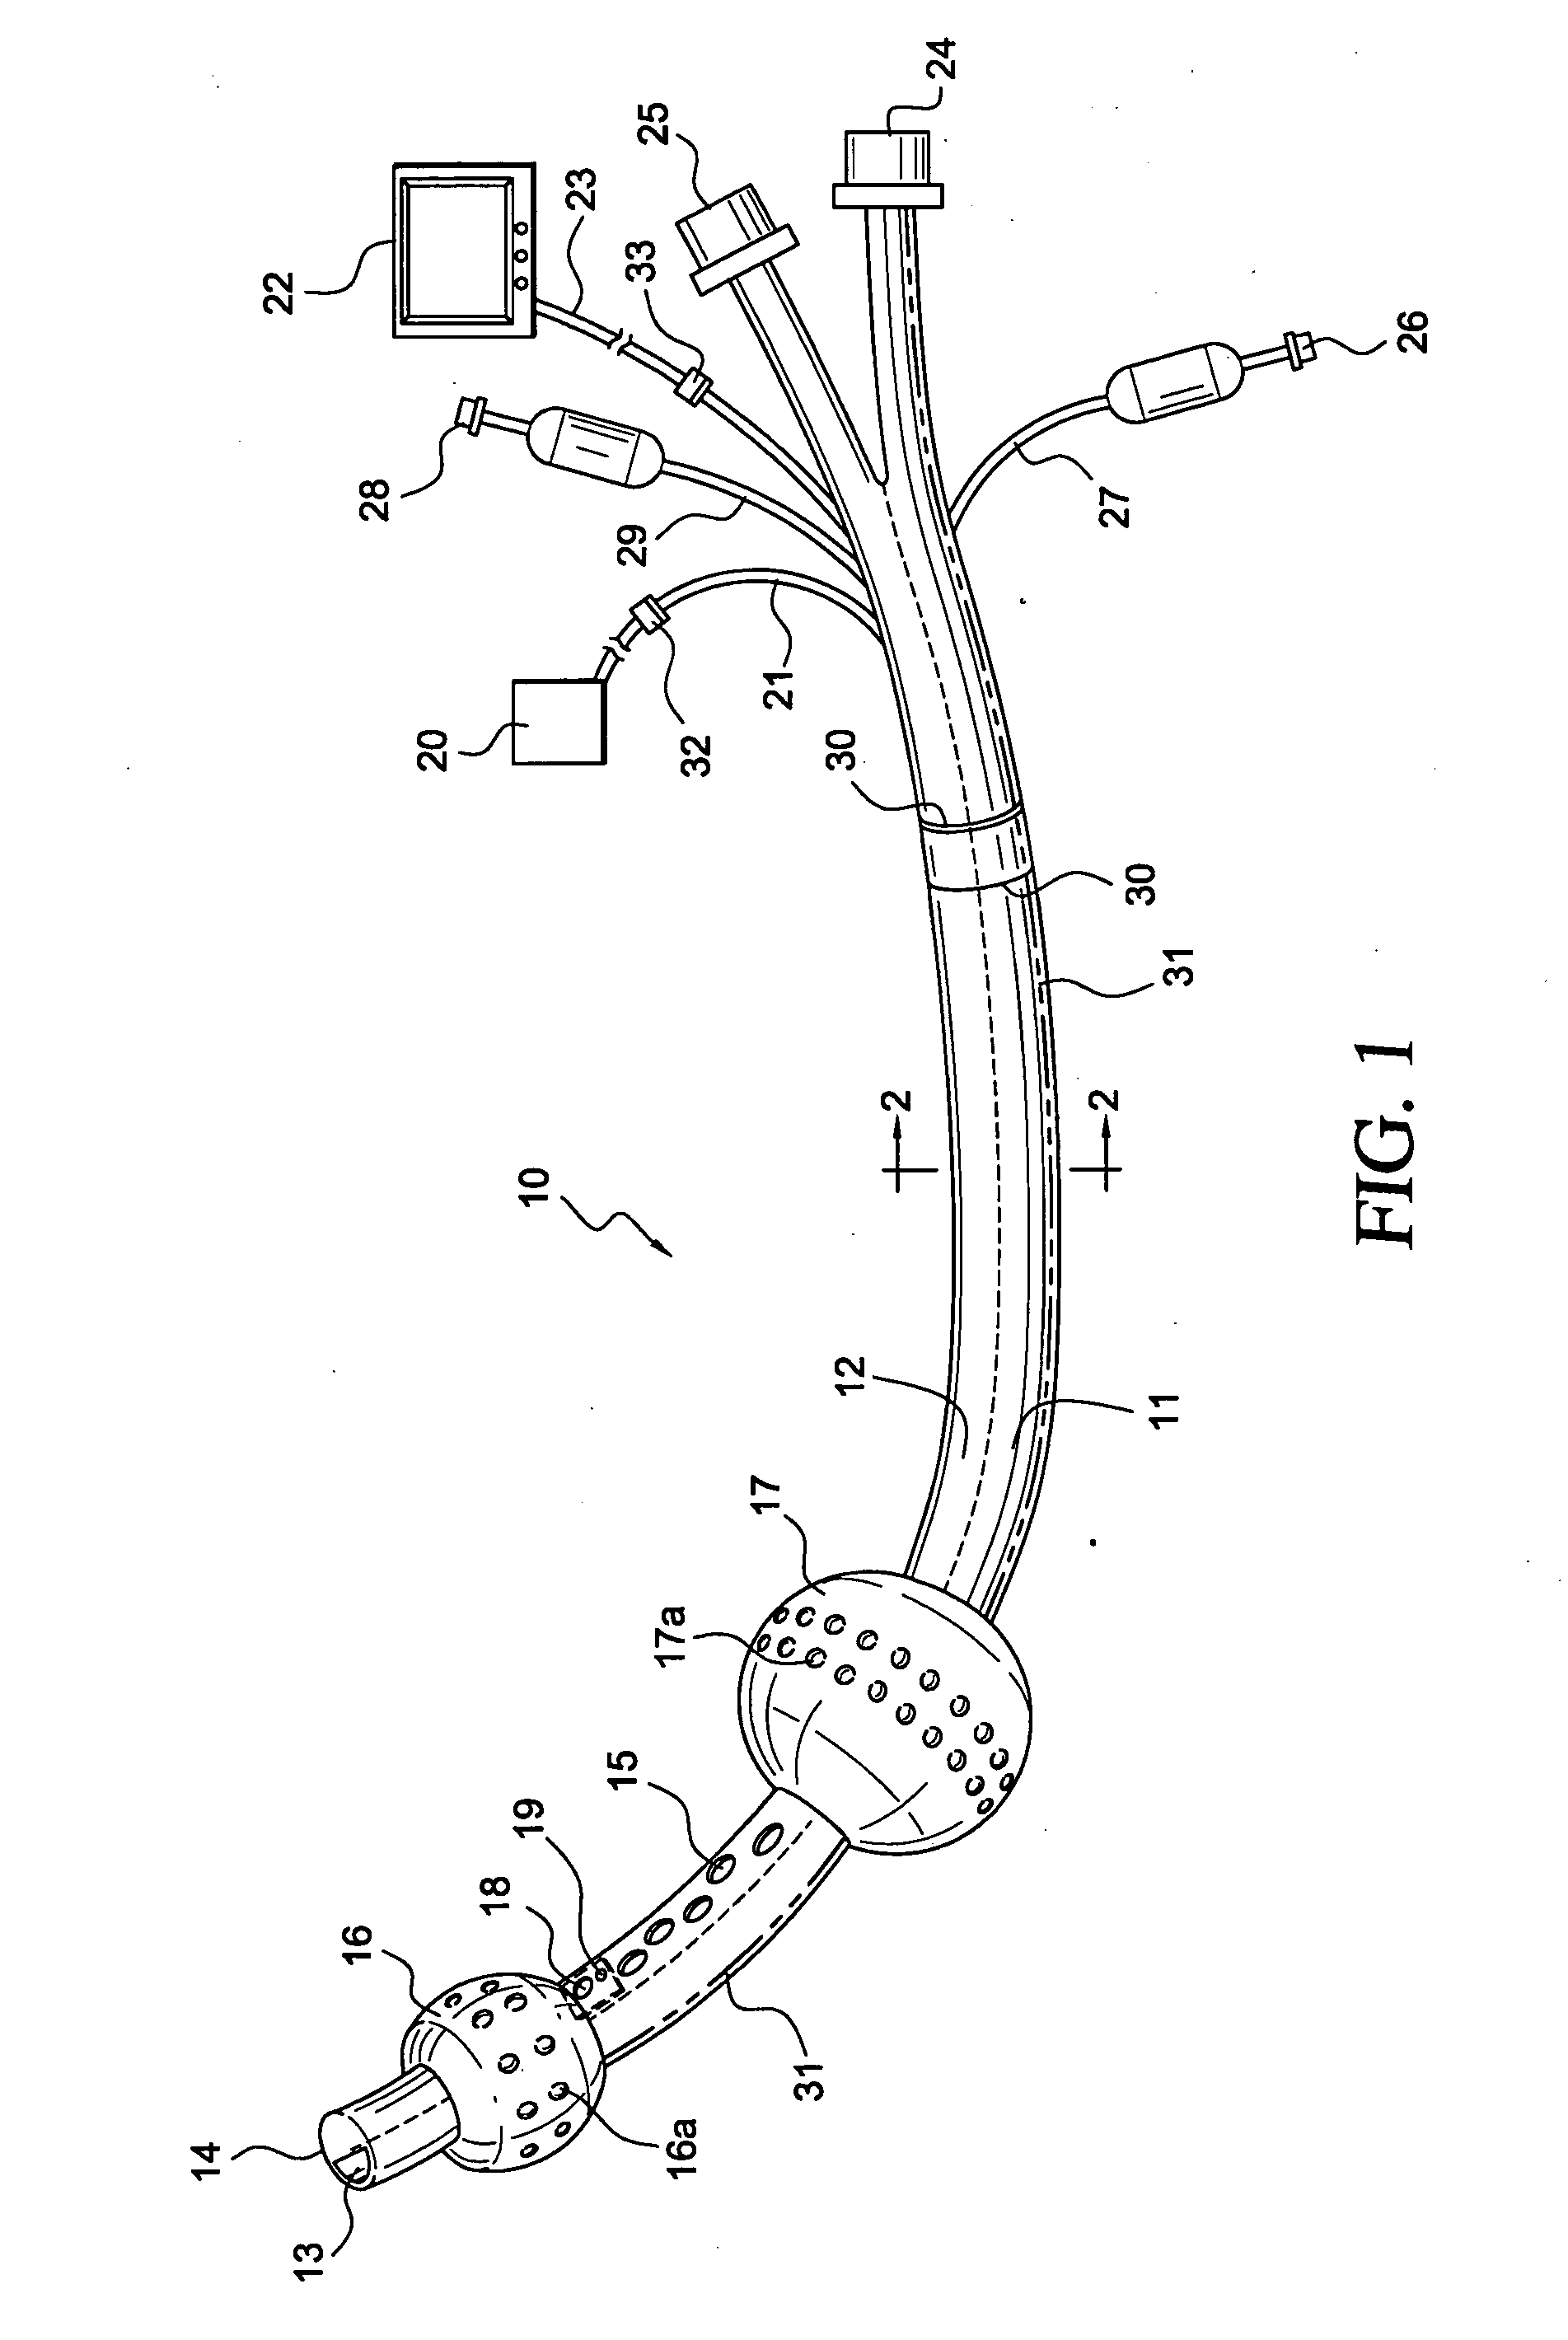 Visualization esophageal-tracheal airway apparatus and methods